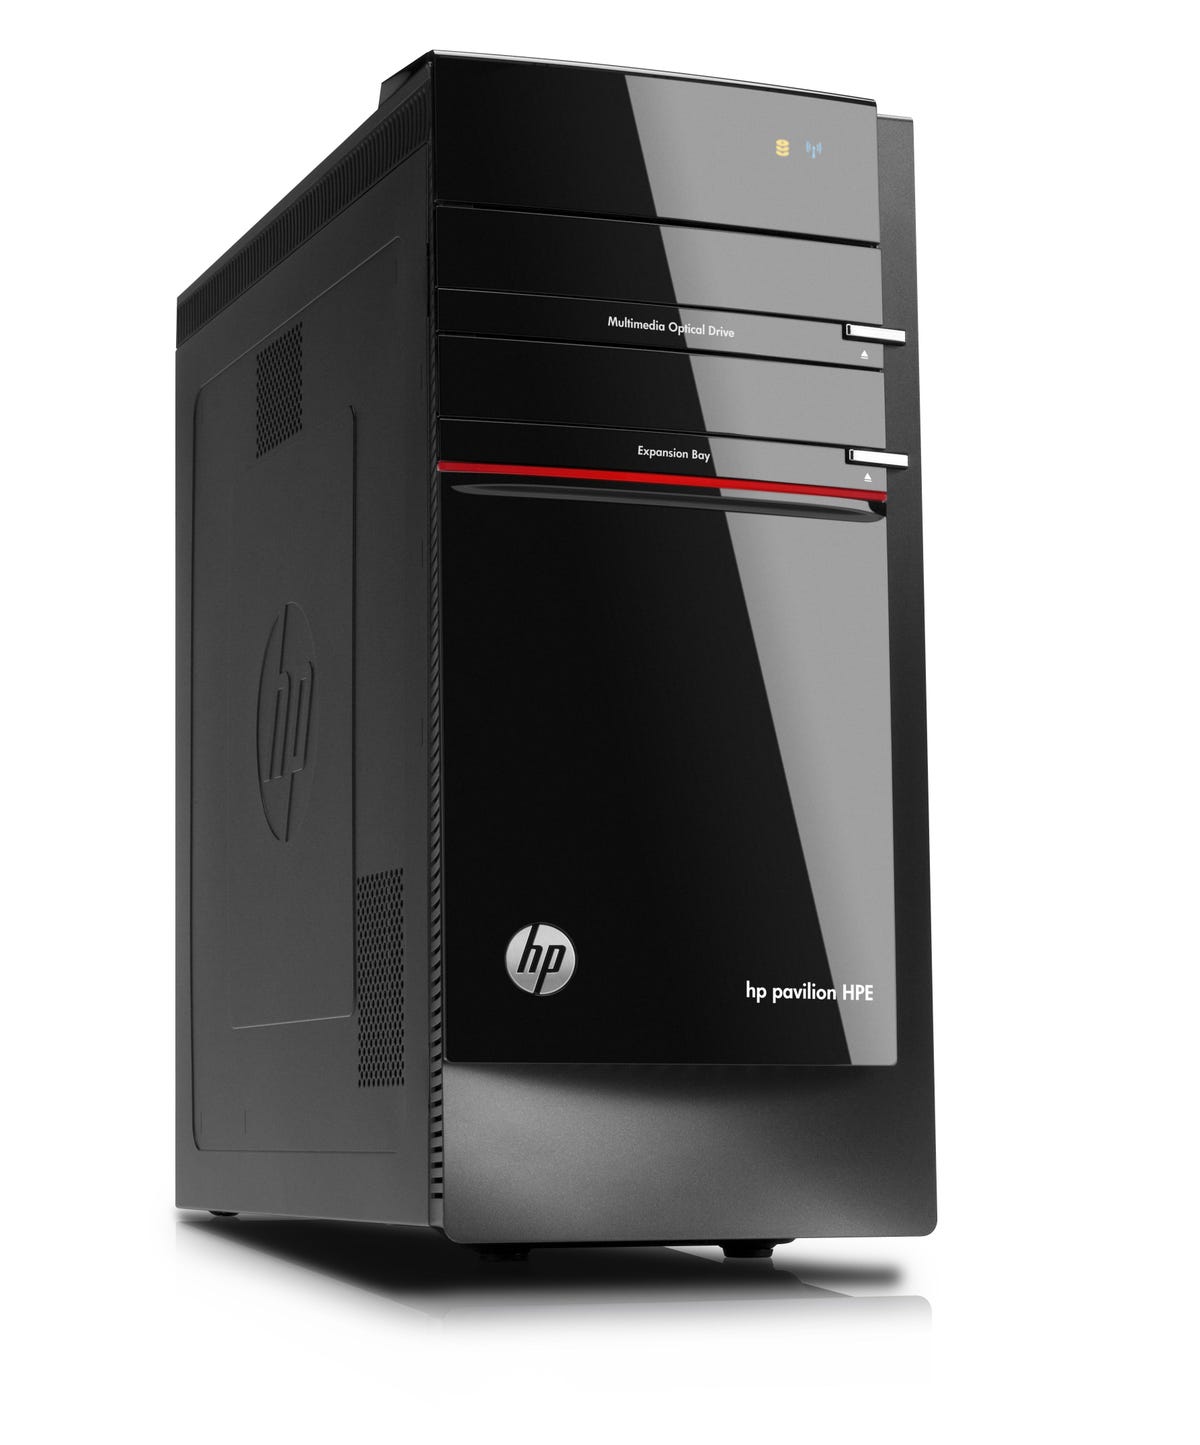 The Pavilion Elite received the biggest design overhaul of HP's new line-up.